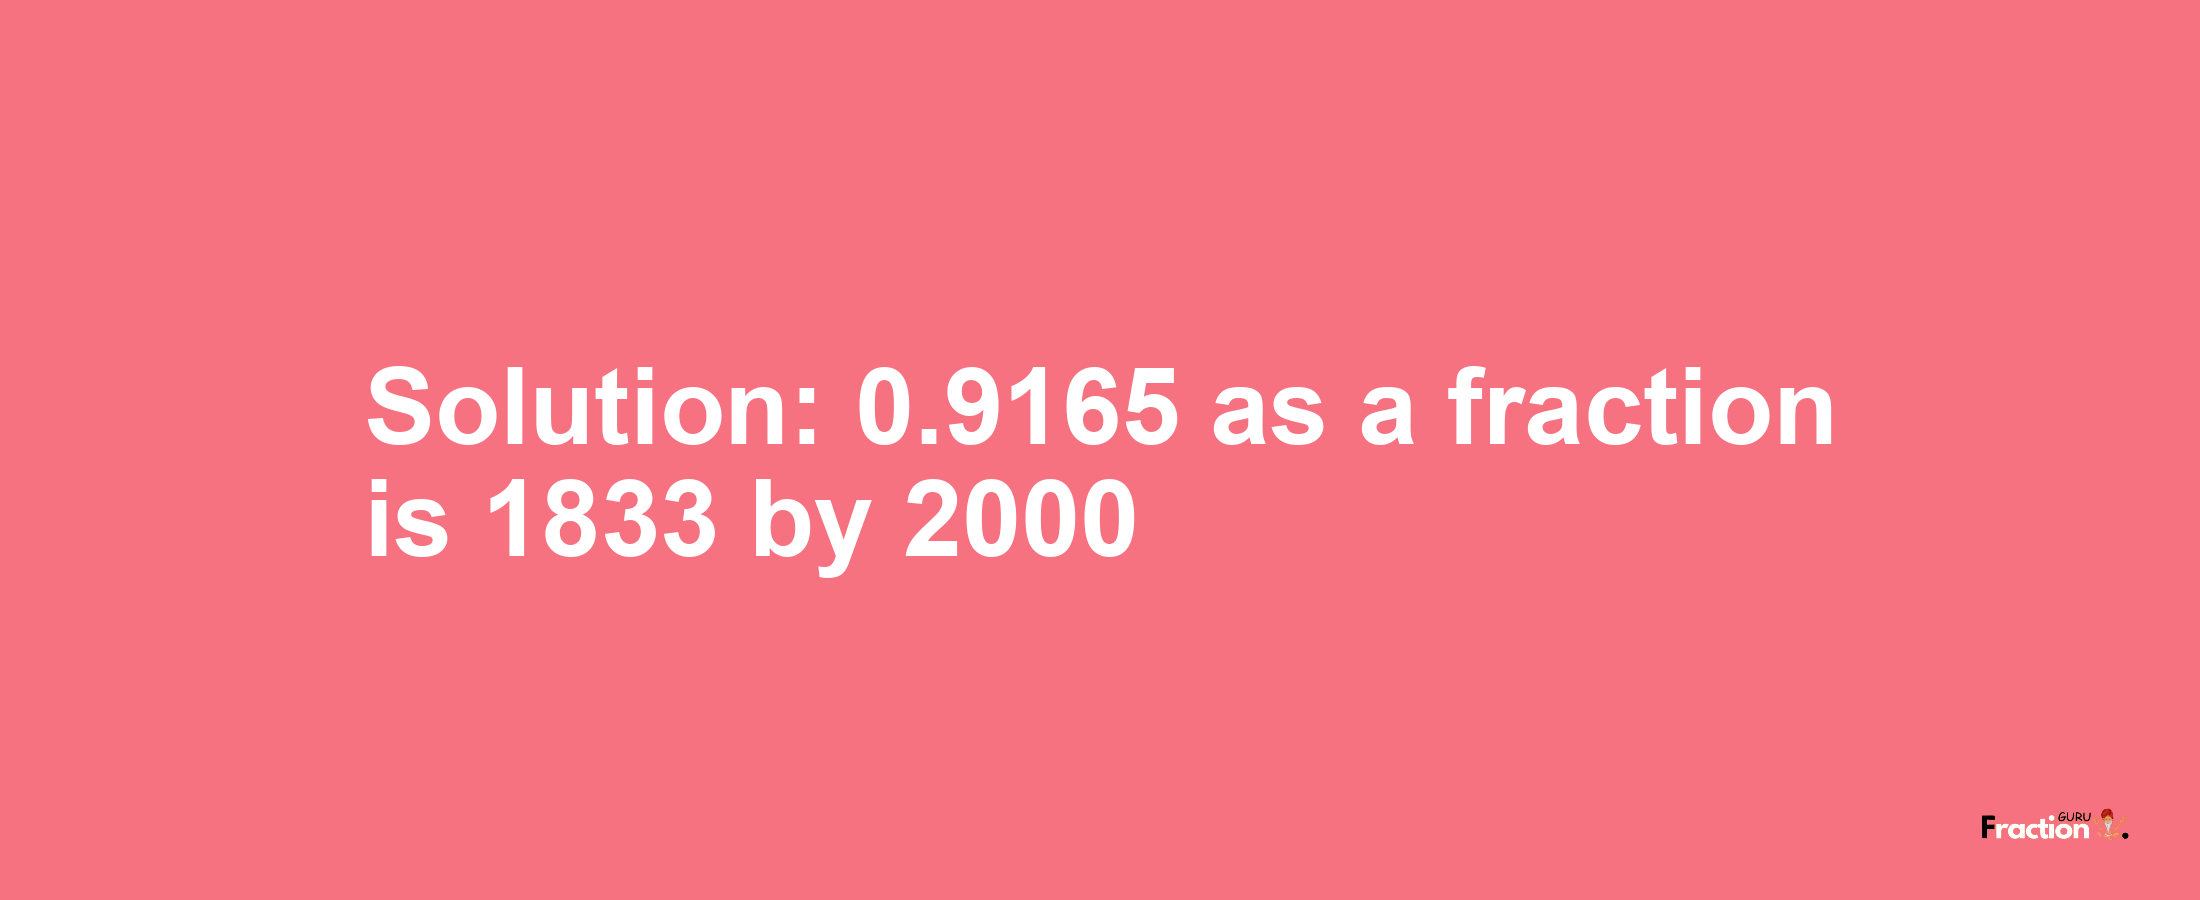 Solution:0.9165 as a fraction is 1833/2000